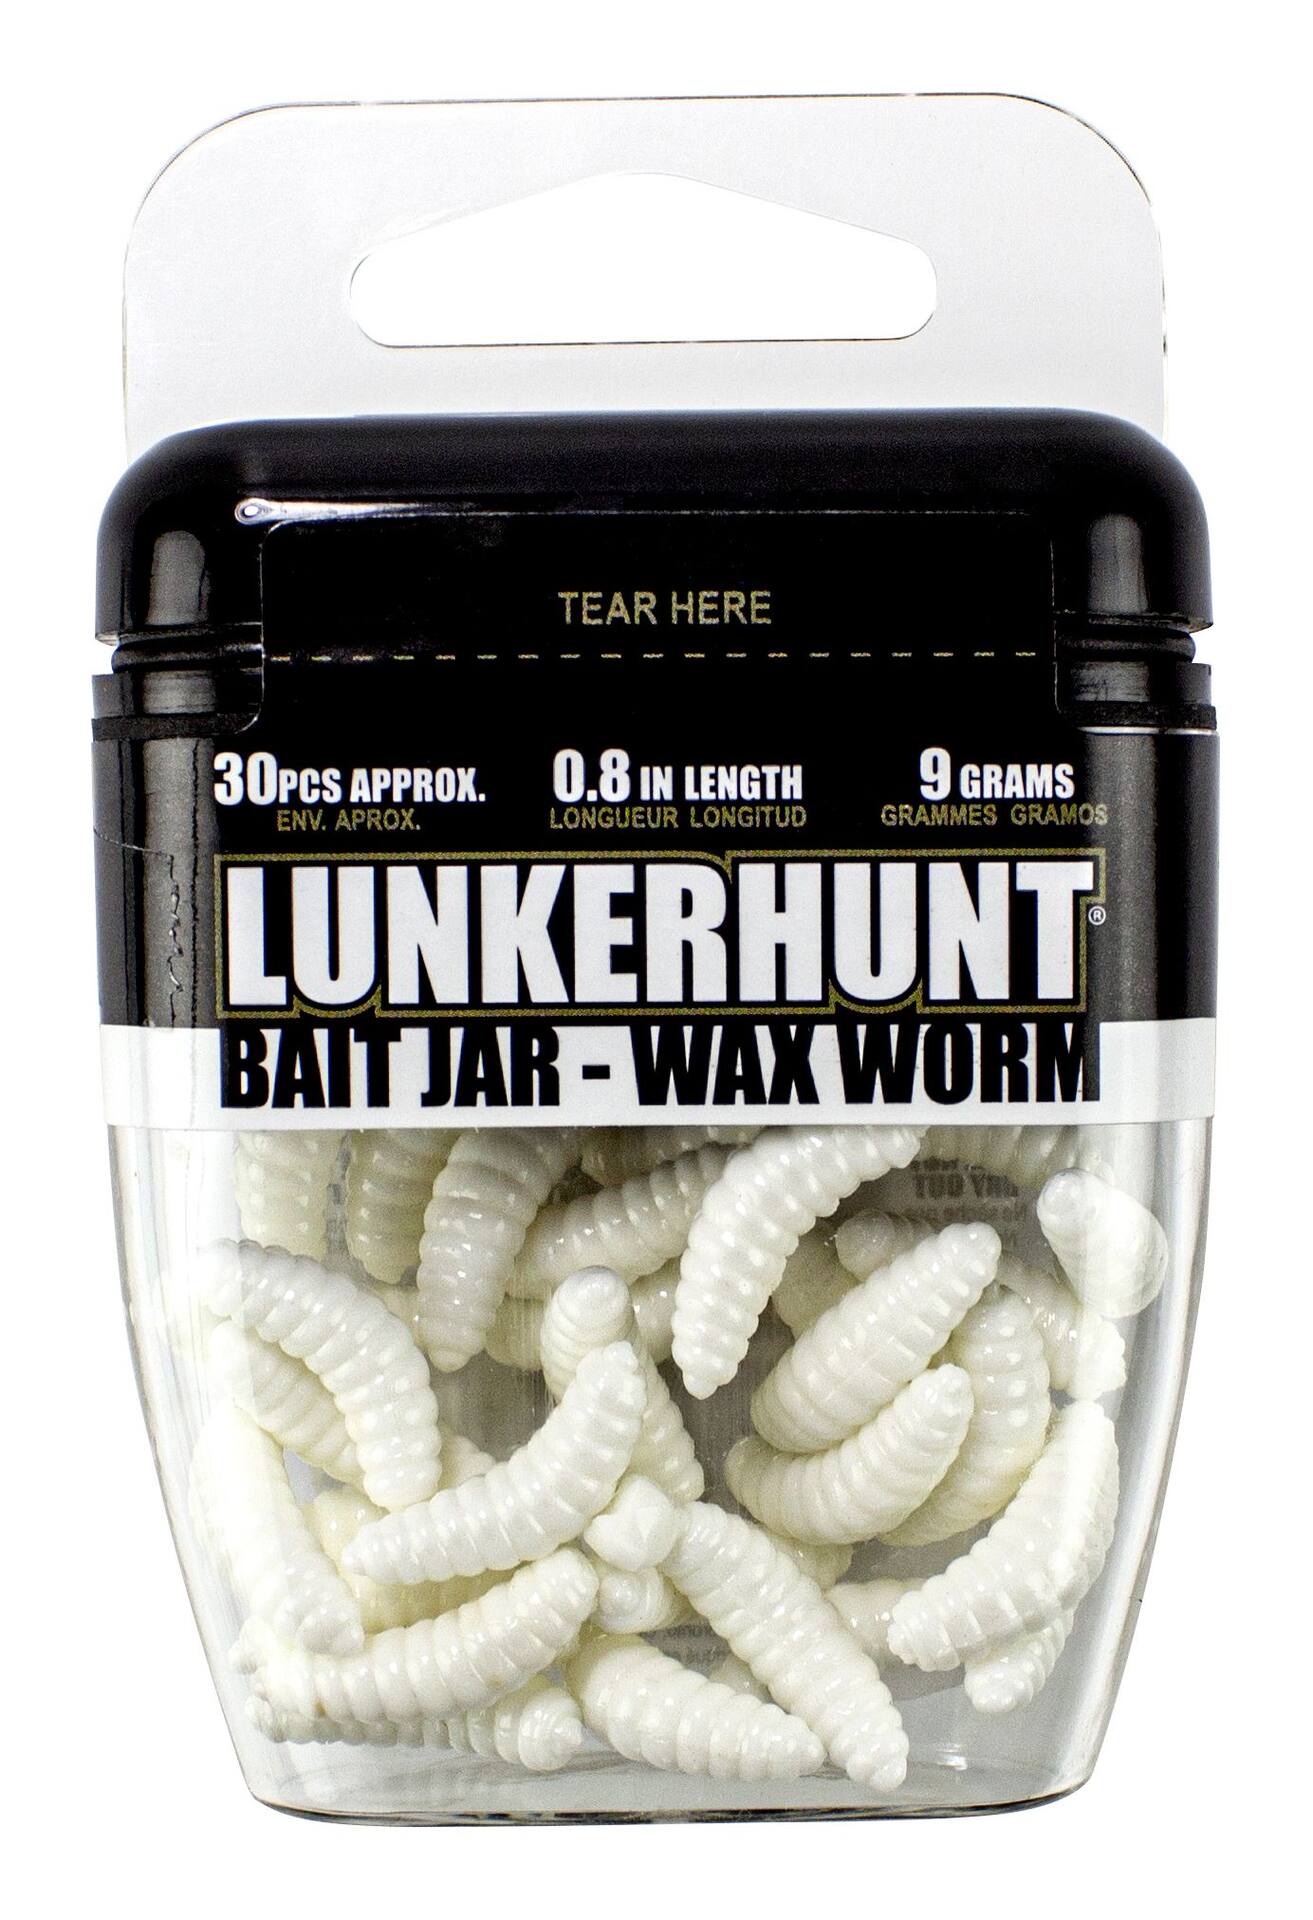 NEW Two Pack of WORM OIL - Fishing Soft Plastic Bait Lubricant/Preservative